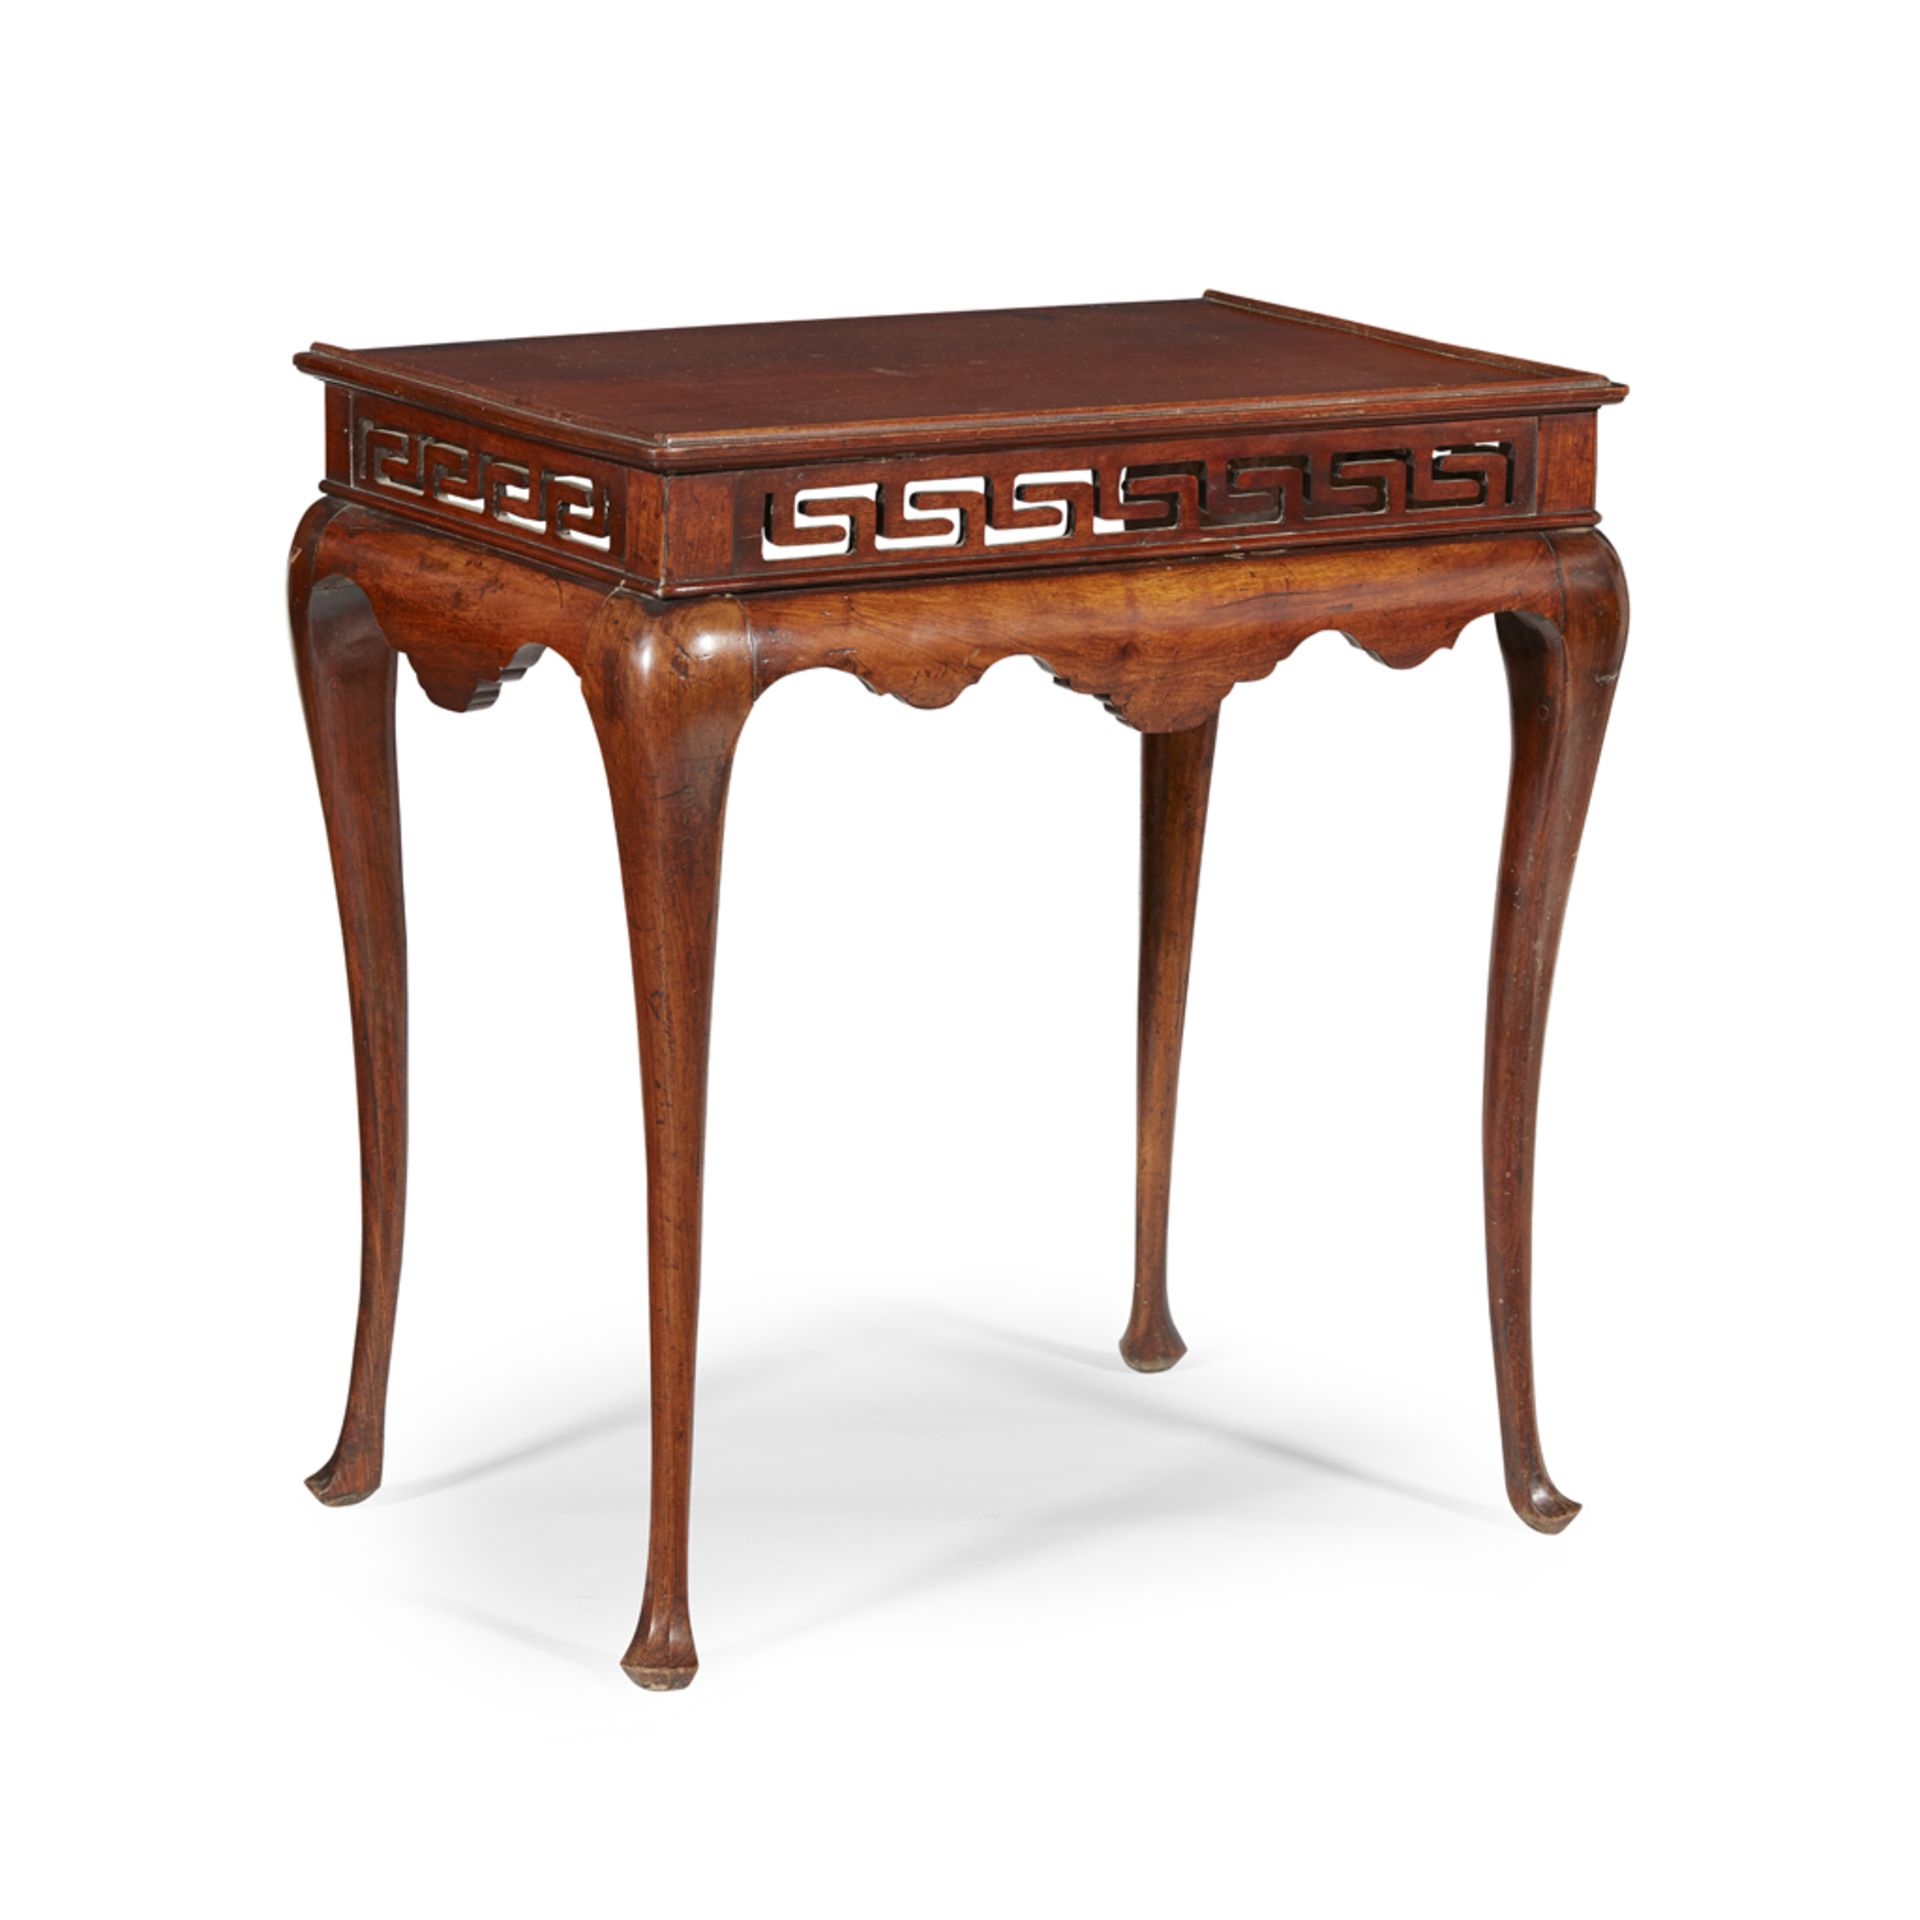 CHINESE EXPORT SIDE TABLE 18TH CENTURY the top with a three-quarter moulded edge above a pierced key